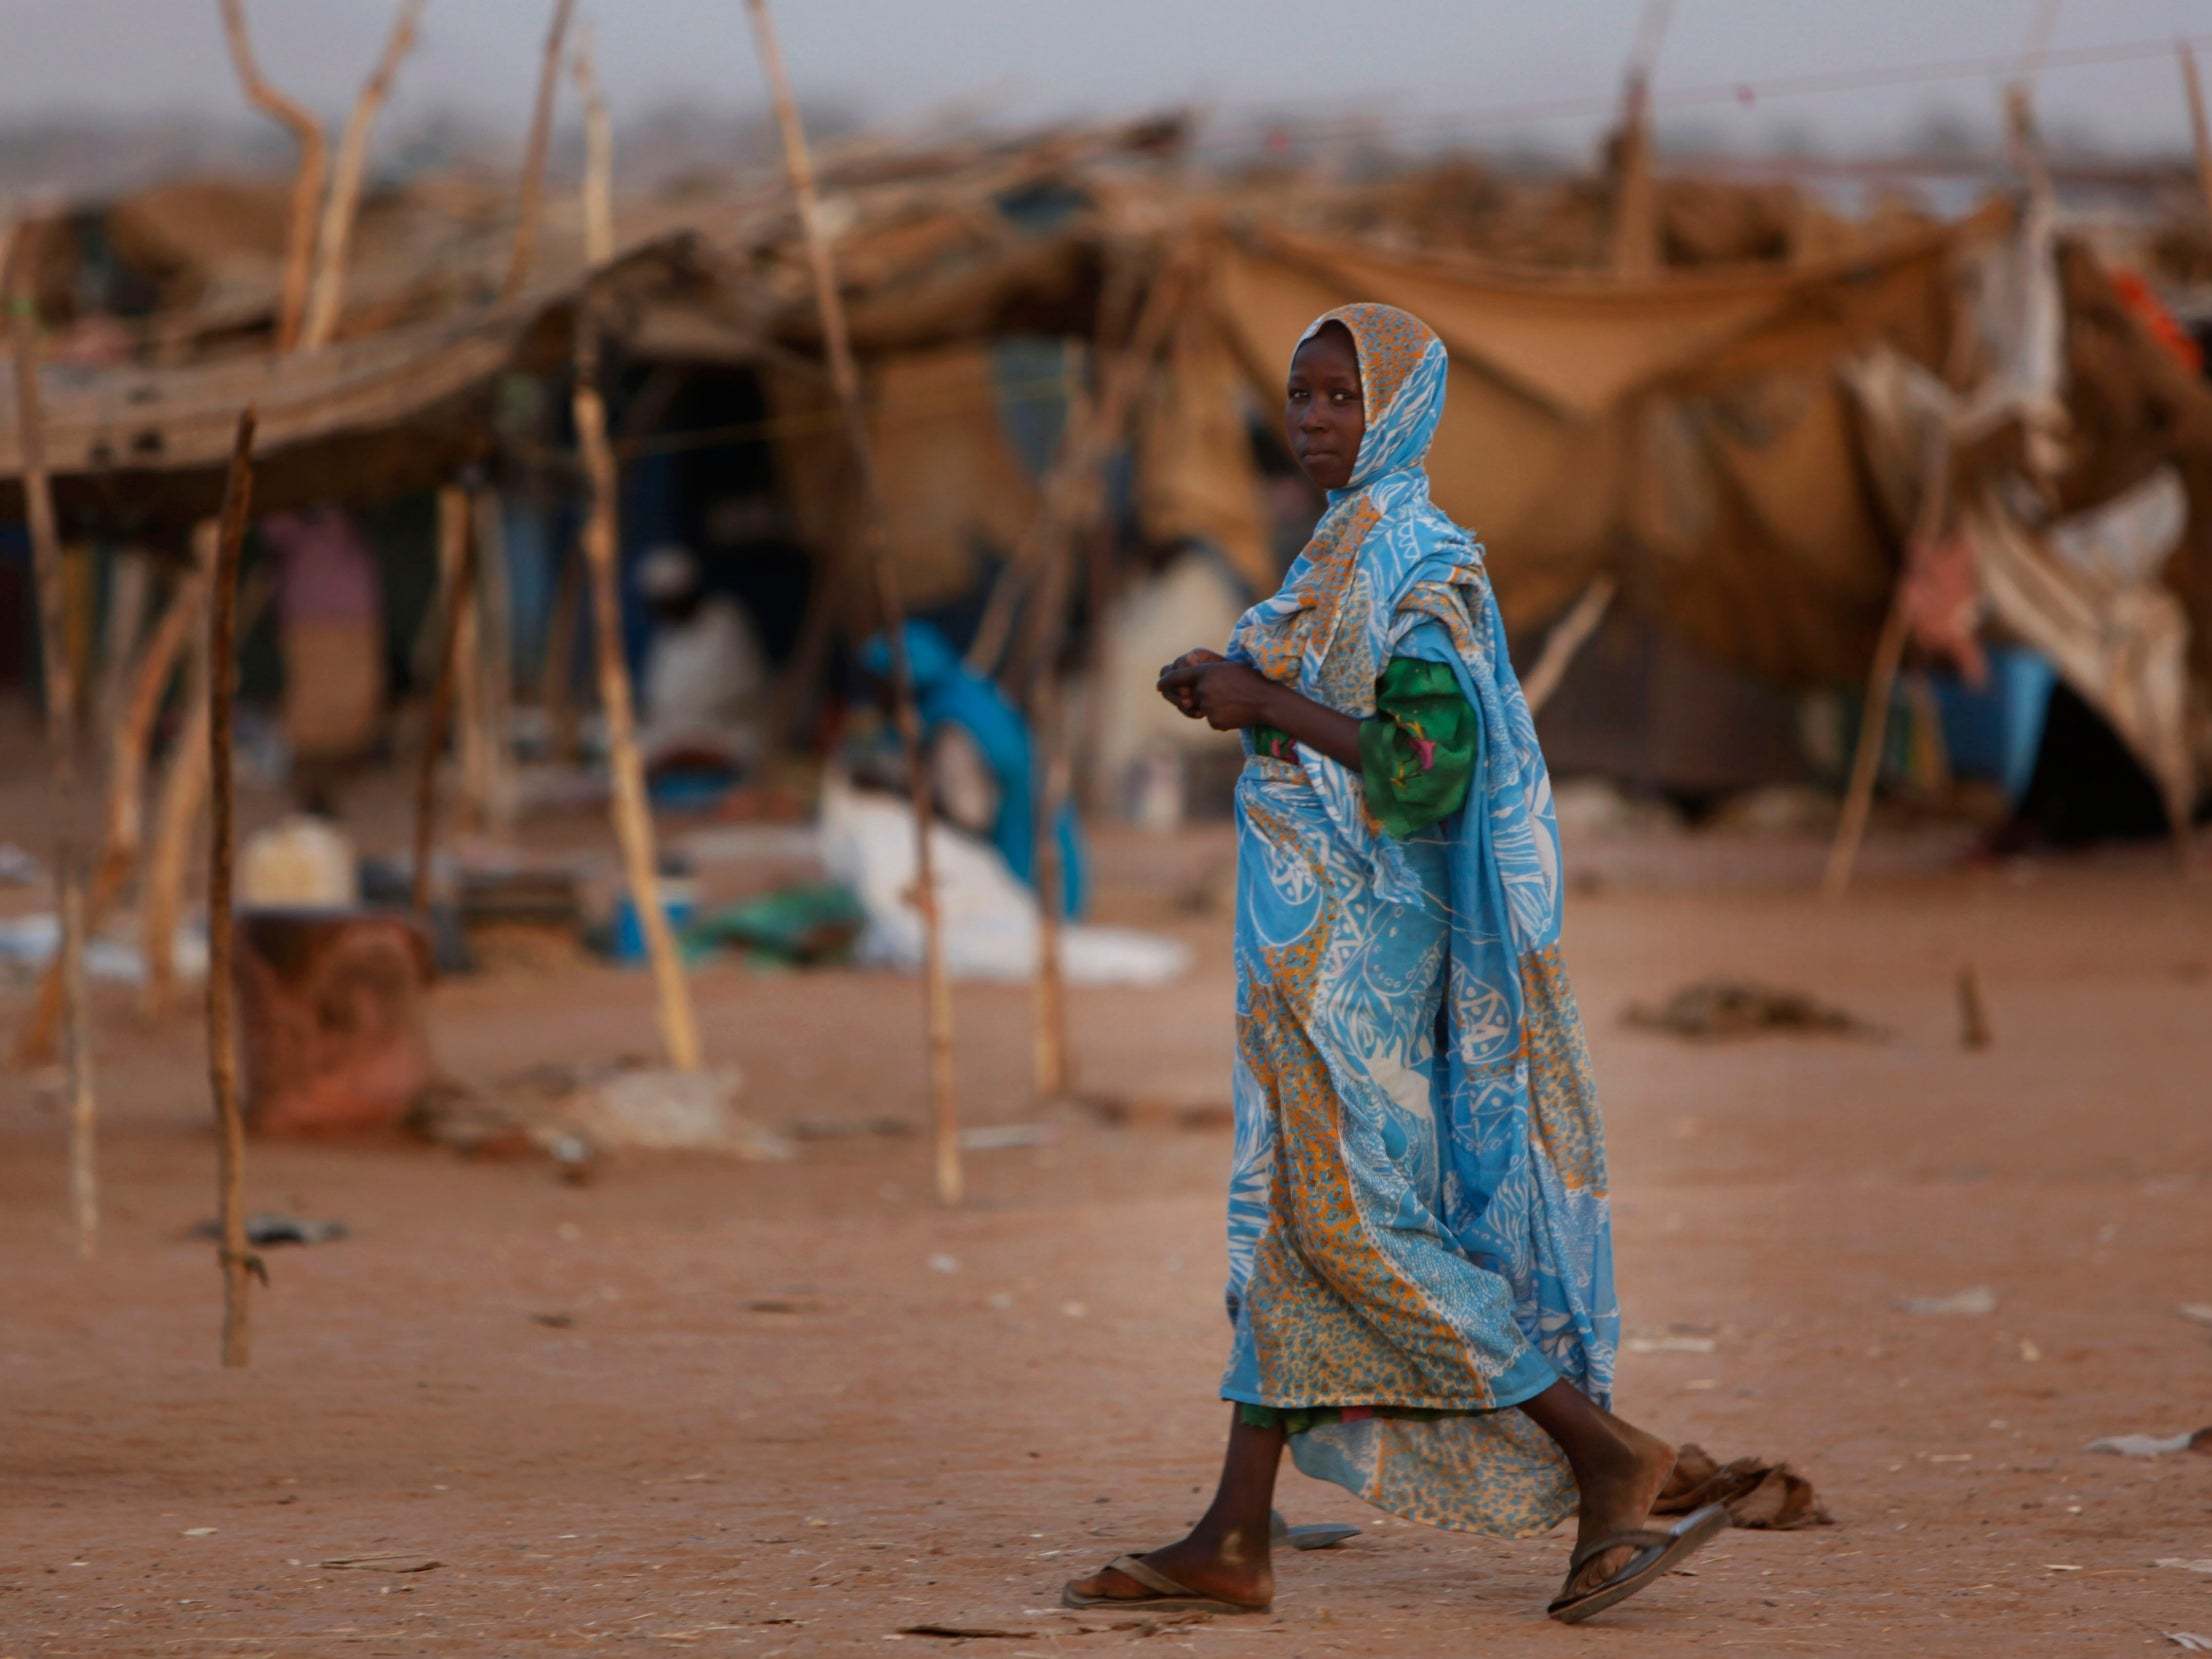 Most people in the Darfur region live in refugee camps